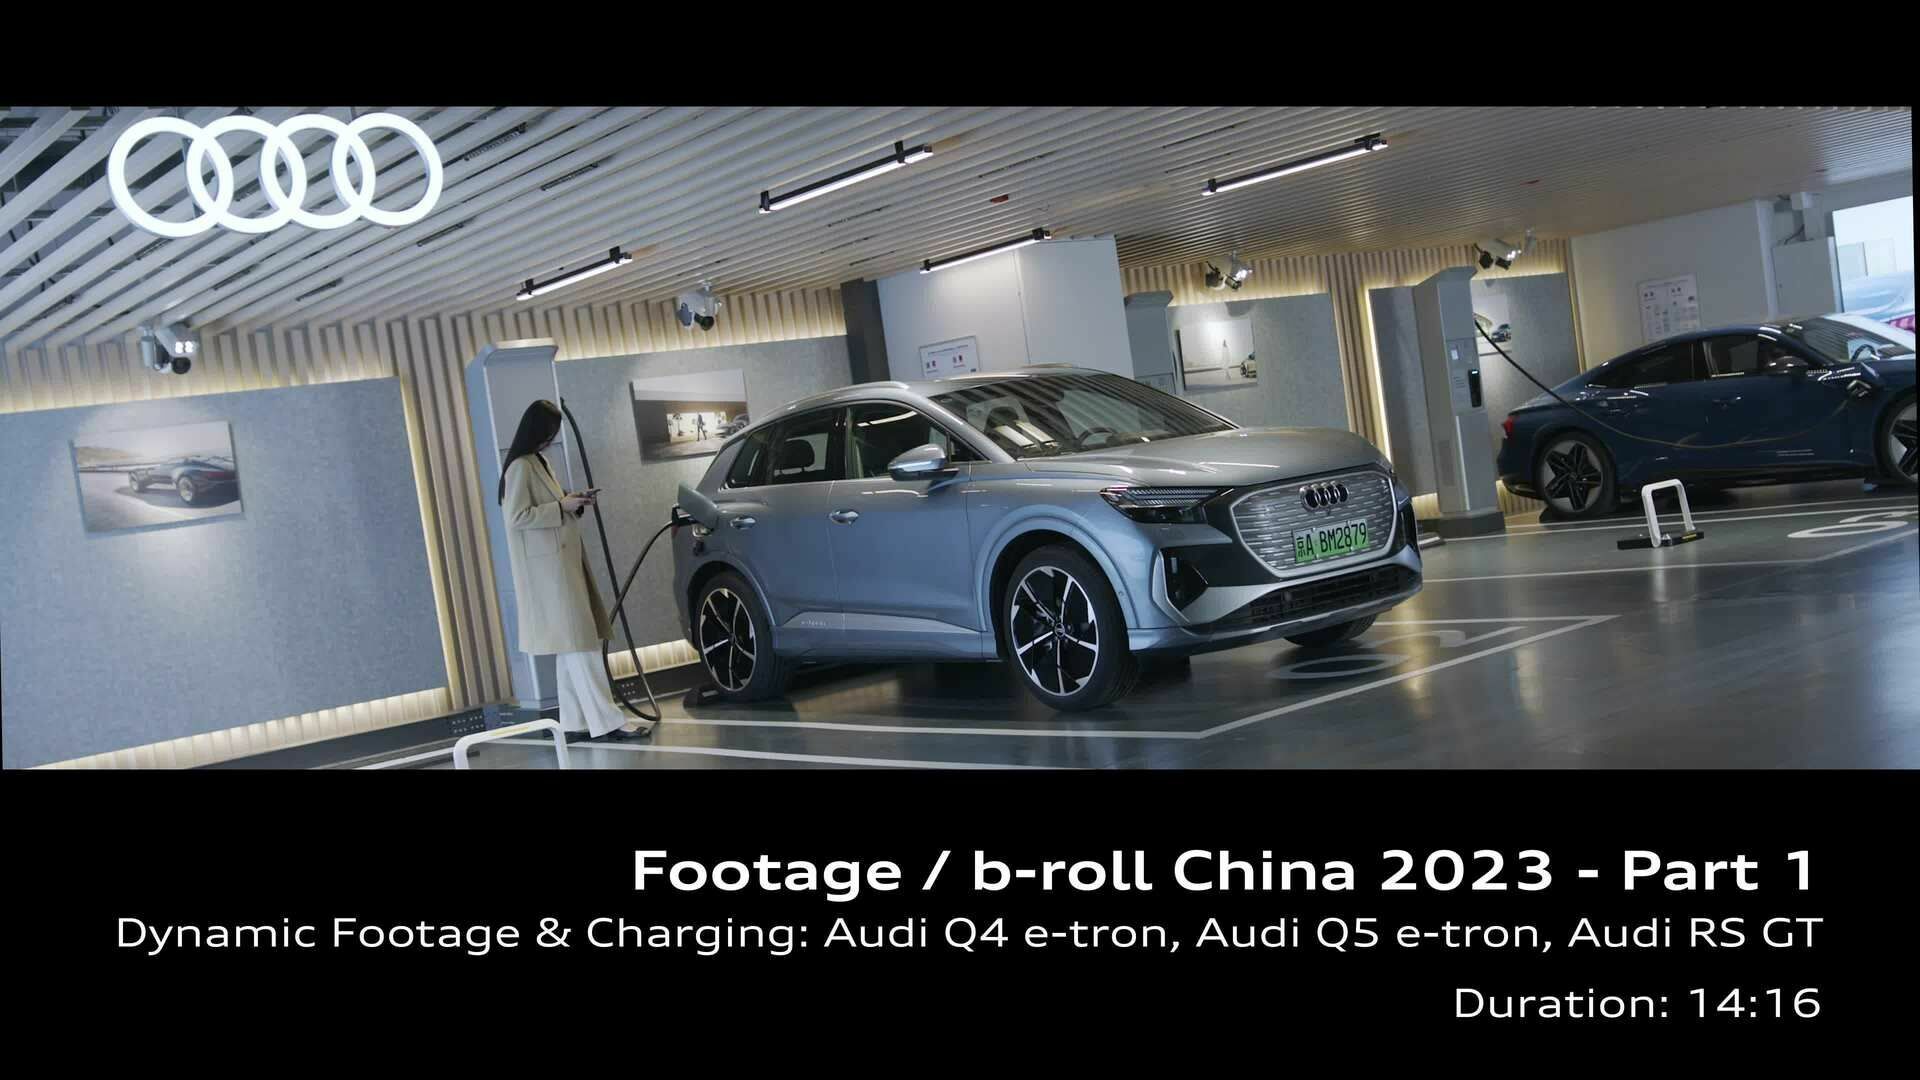 Footage: Auto Shanghai 2023 – Driving scenes & Audi charging stations